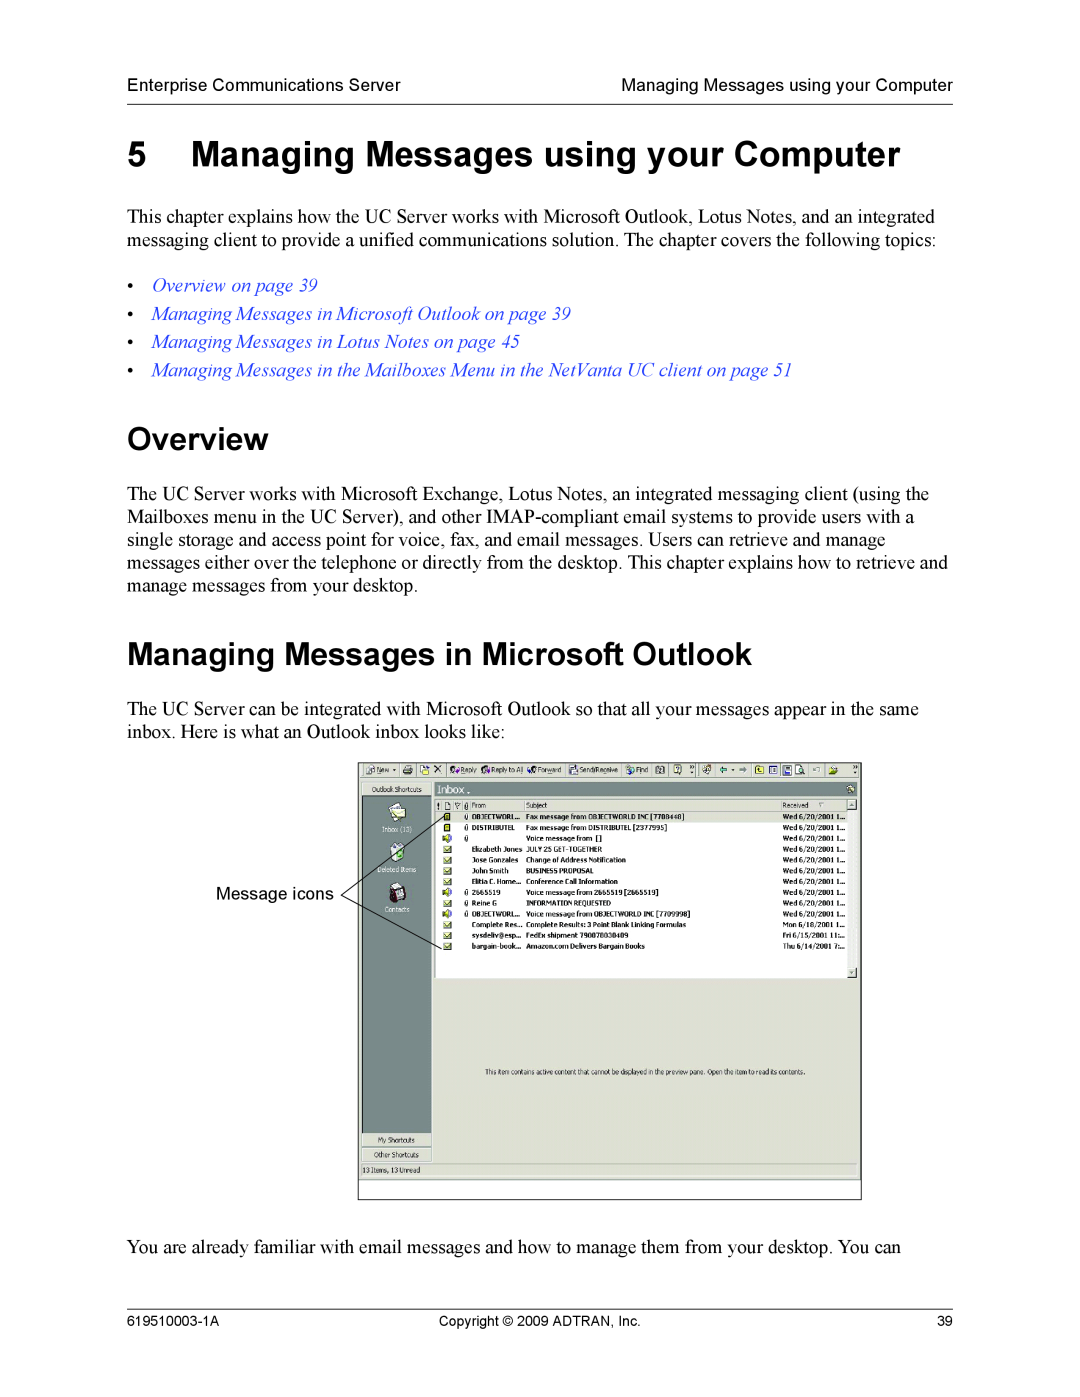 ADTRAN 619510003-1A manual Managing Messages using your Computer, Managing Messages in Microsoft Outlook, Overview 